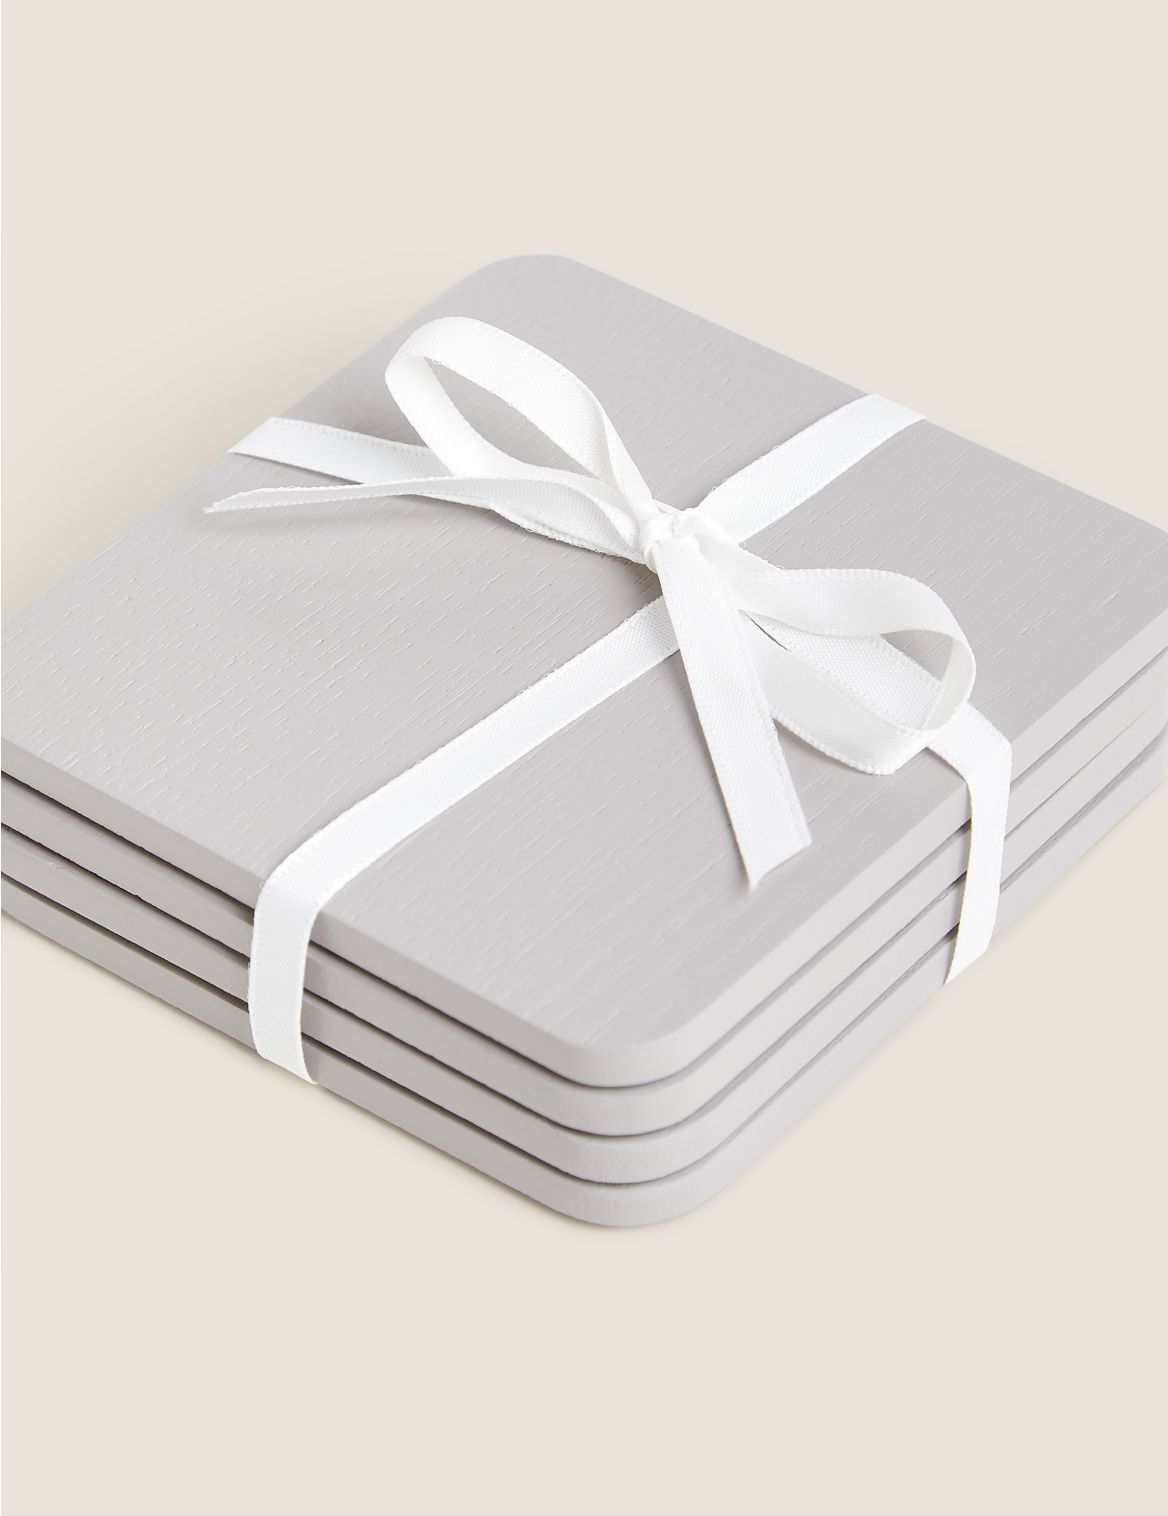 Set of 4 Square Wooden Coasters grey